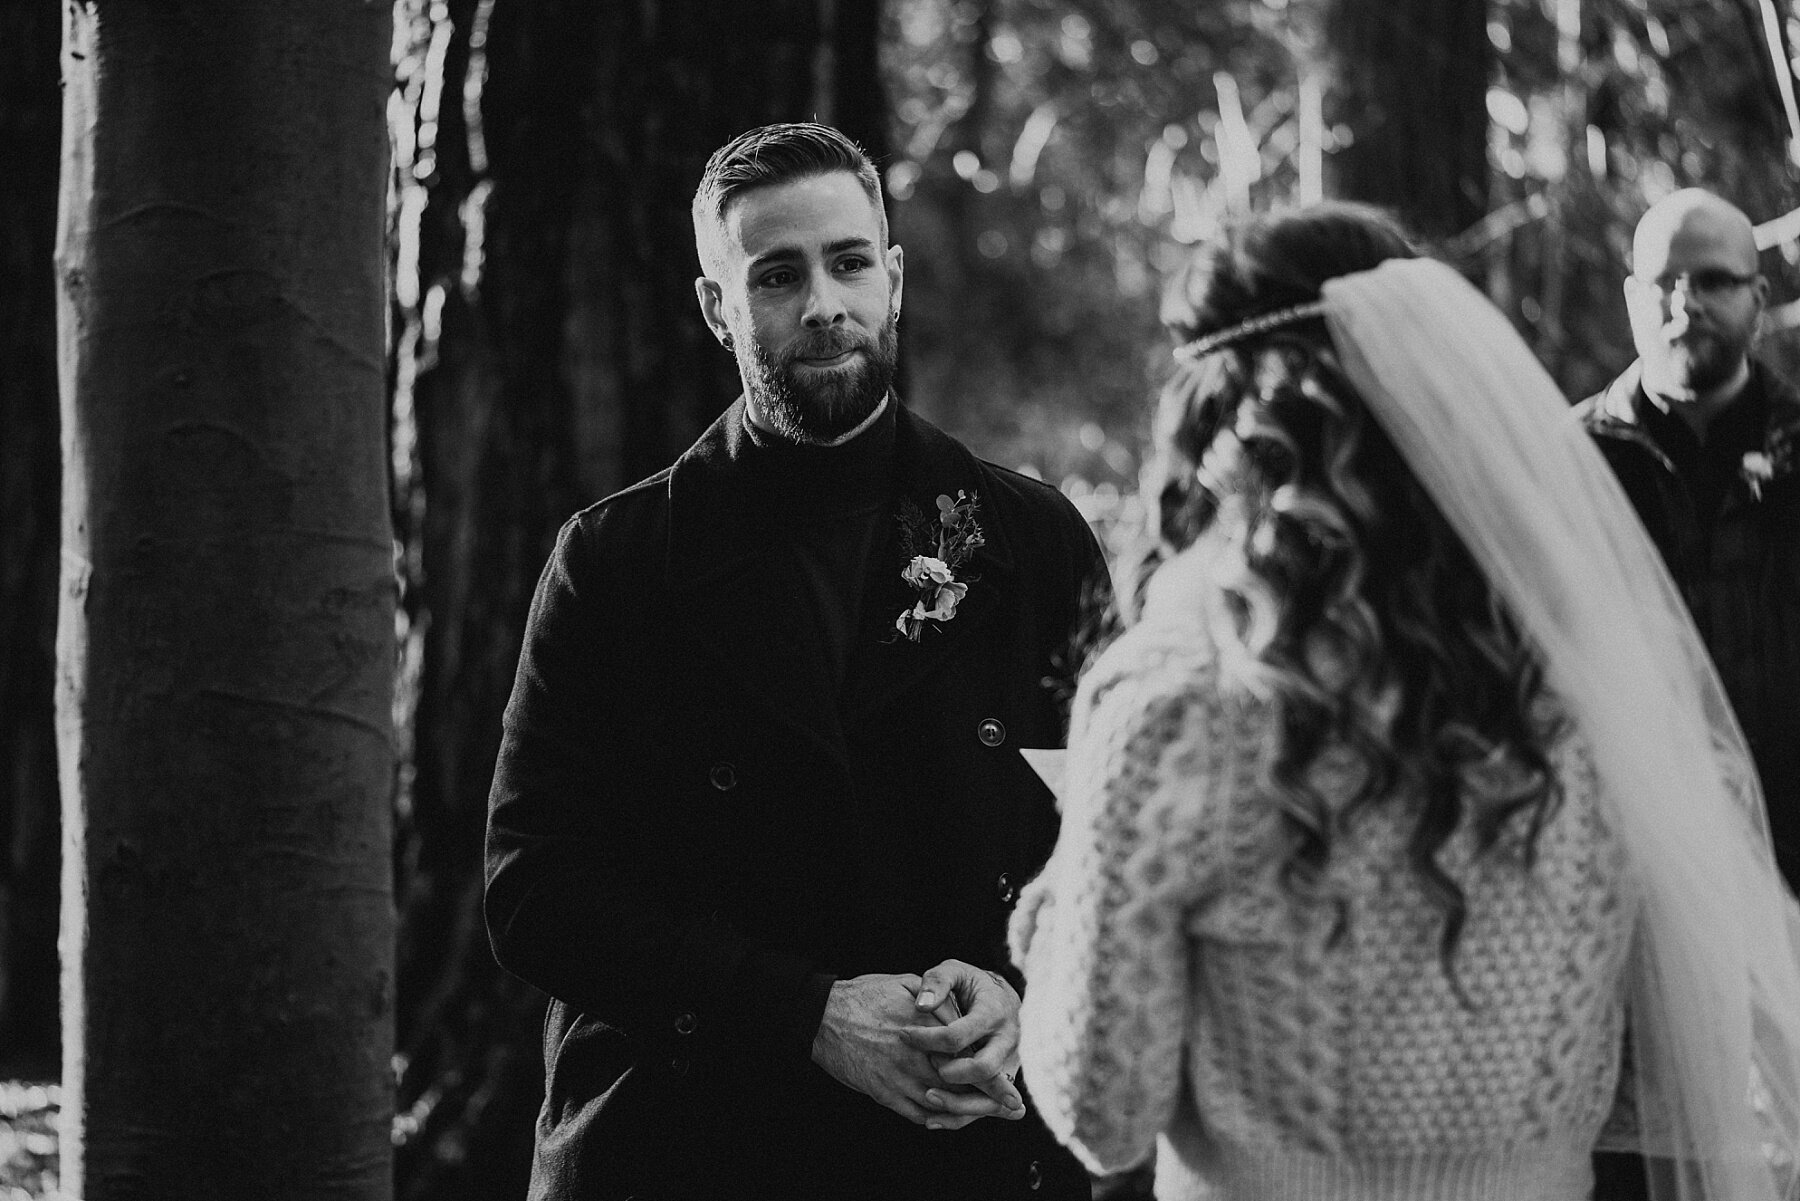 Vancouver Forest Elopement